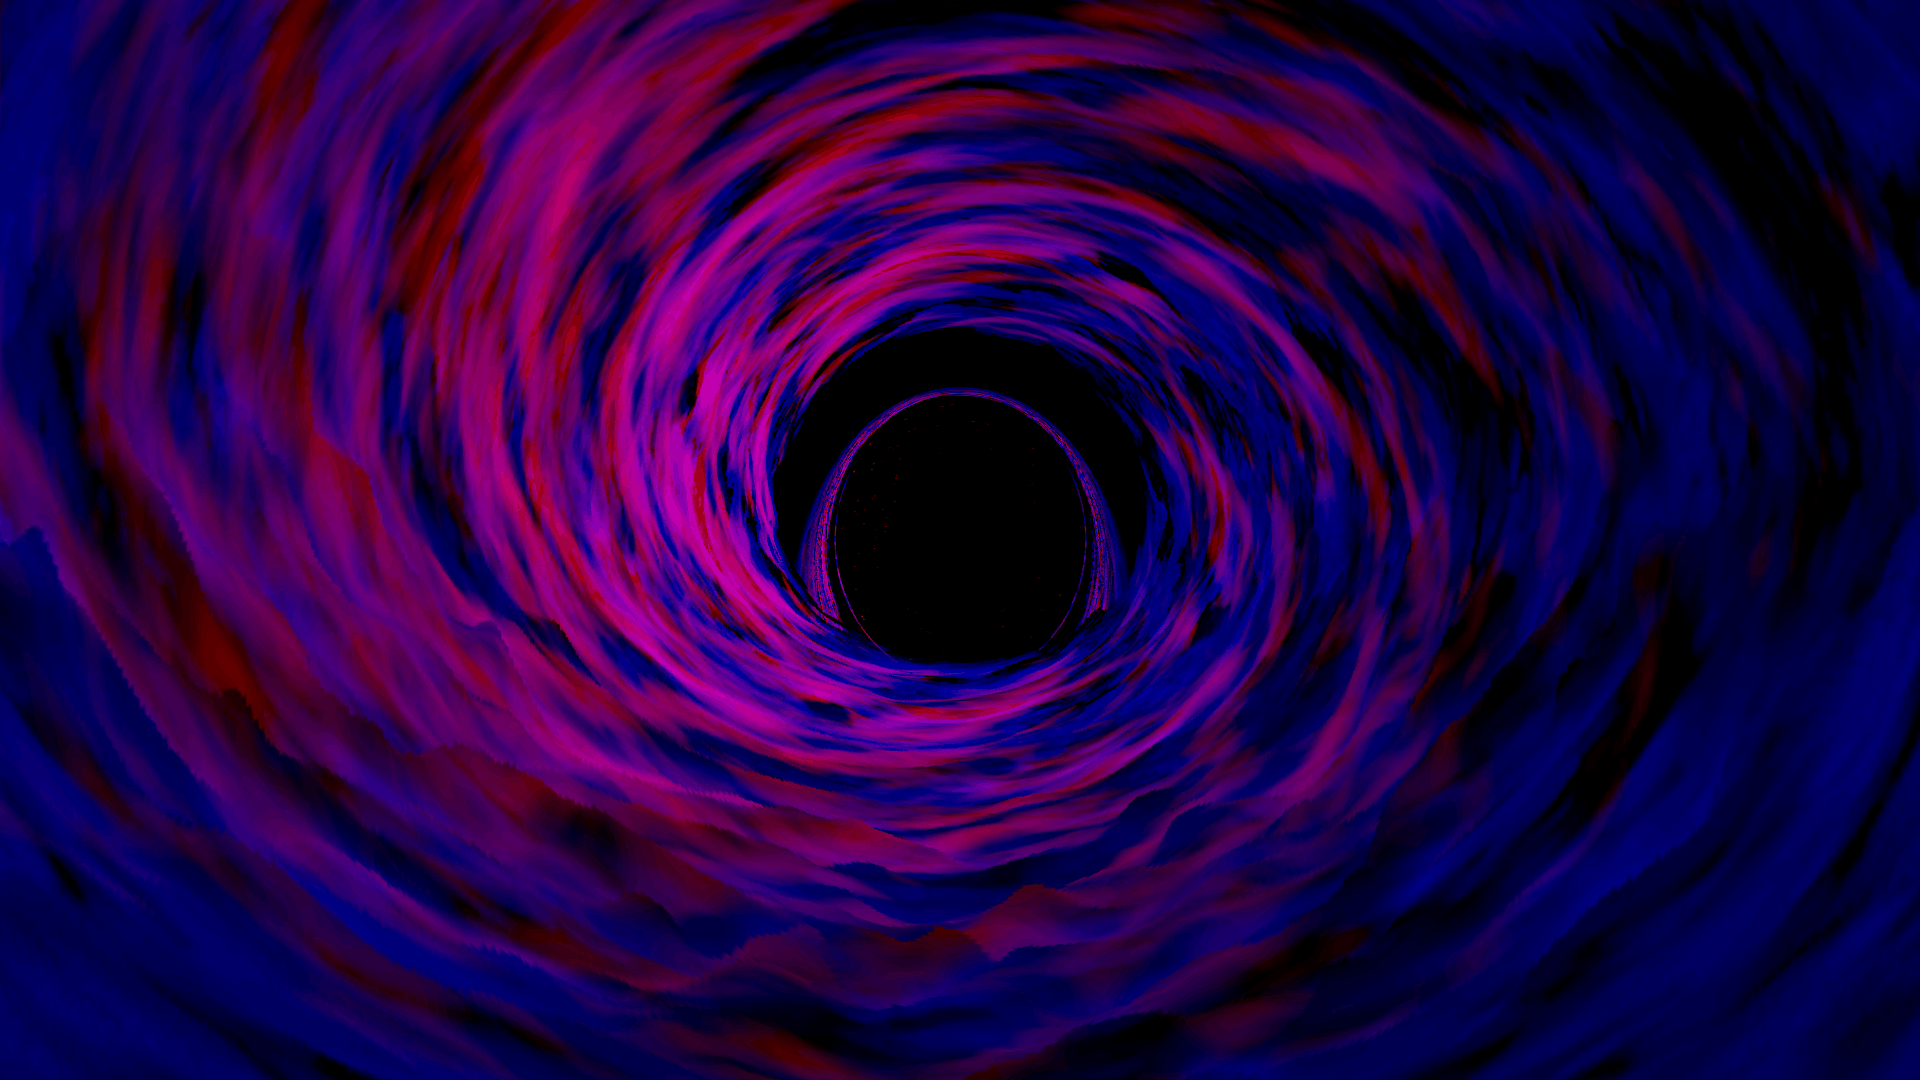 This animation of supercomputer data takes you to the inner zone of the accretion disk of a stellar-mass black hole. Gas heated to 20 million degrees F as it spirals toward the black hole glows in low-energy, or soft, X-rays. Just before the gas plunges to the center, its orbital motion is approaching the speed of light. X-rays up to hundreds of times more powerful ("harder") than those in the disk arise from the corona, a region of tenuous and much hotter gas around the disk. Coronal temperatures reach billions of degrees. The event horizon is the boundary where all trajectories, including those of light, must go inward. Nothing, not even light, can pass outward across the event horizon and escape the black hole.Music: "Lost in Space" by Lars Leonhard, courtesy of artist.For complete transcript, click here.